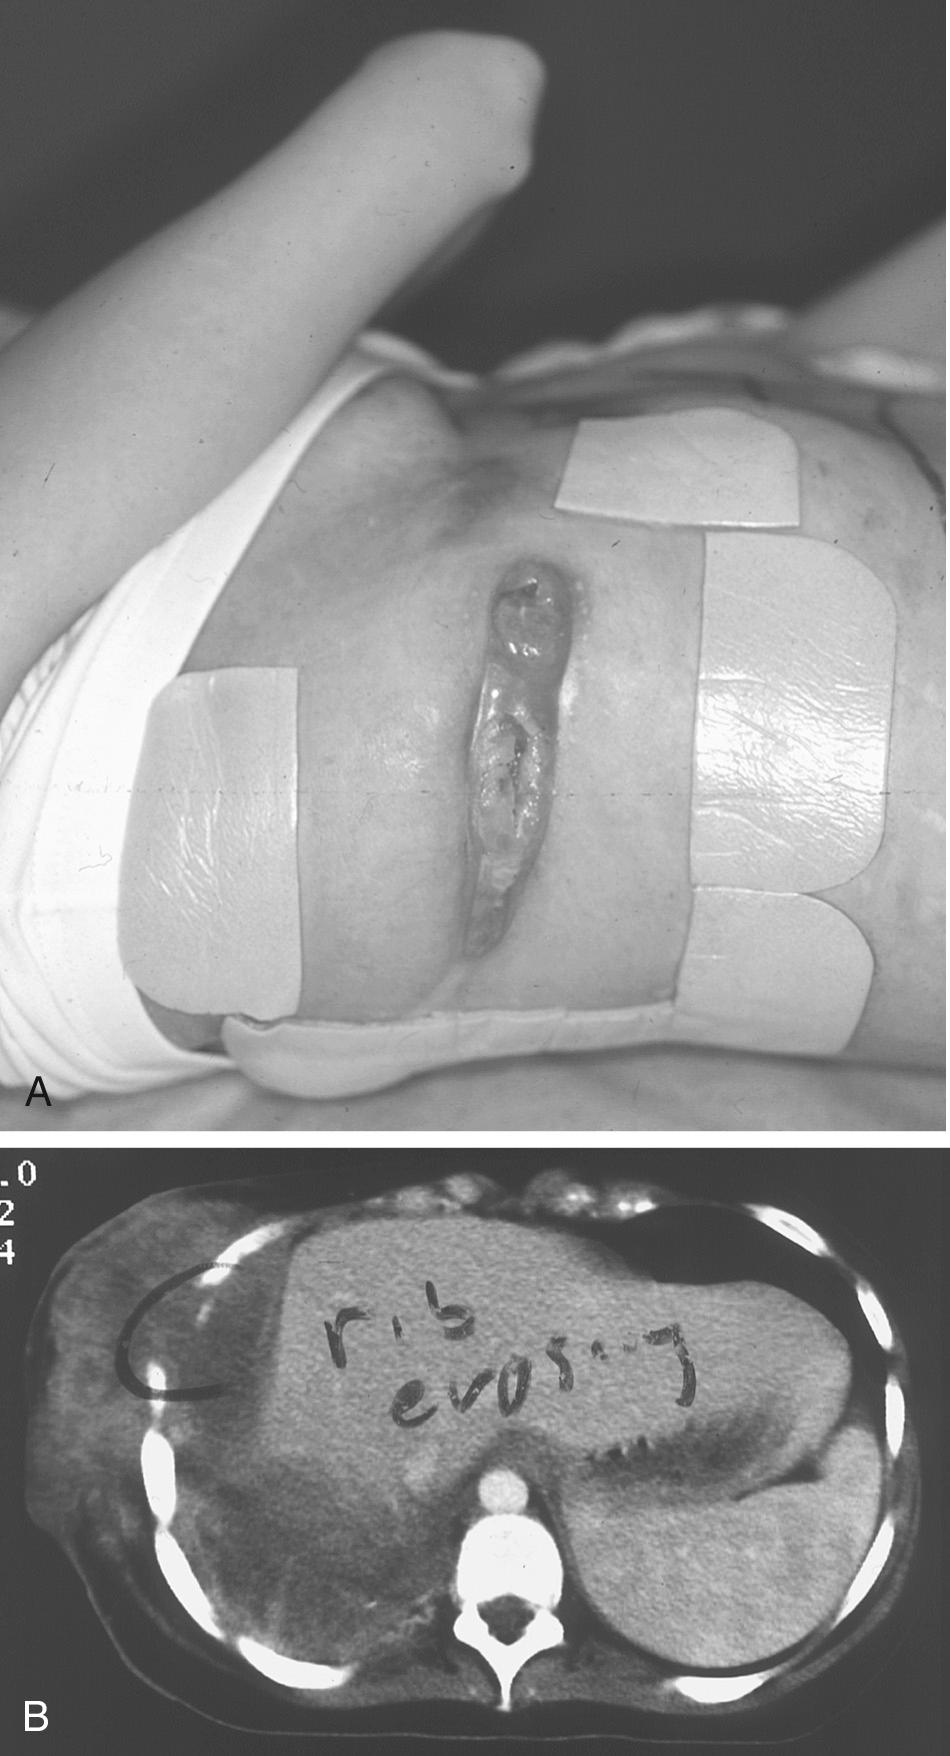 FIGURE 20-1, A, A 25-year-old woman presents to our institution with a nonhealing thoracotomy incision with a draining wound after an attempted decortication for what was initially felt to be a postpneumonic empyema. B, A CT scan demonstrates a large right lower lobe adenocarcinoma of the lung with direct invasion of the chest wall as the cause of the nonhealing wound.